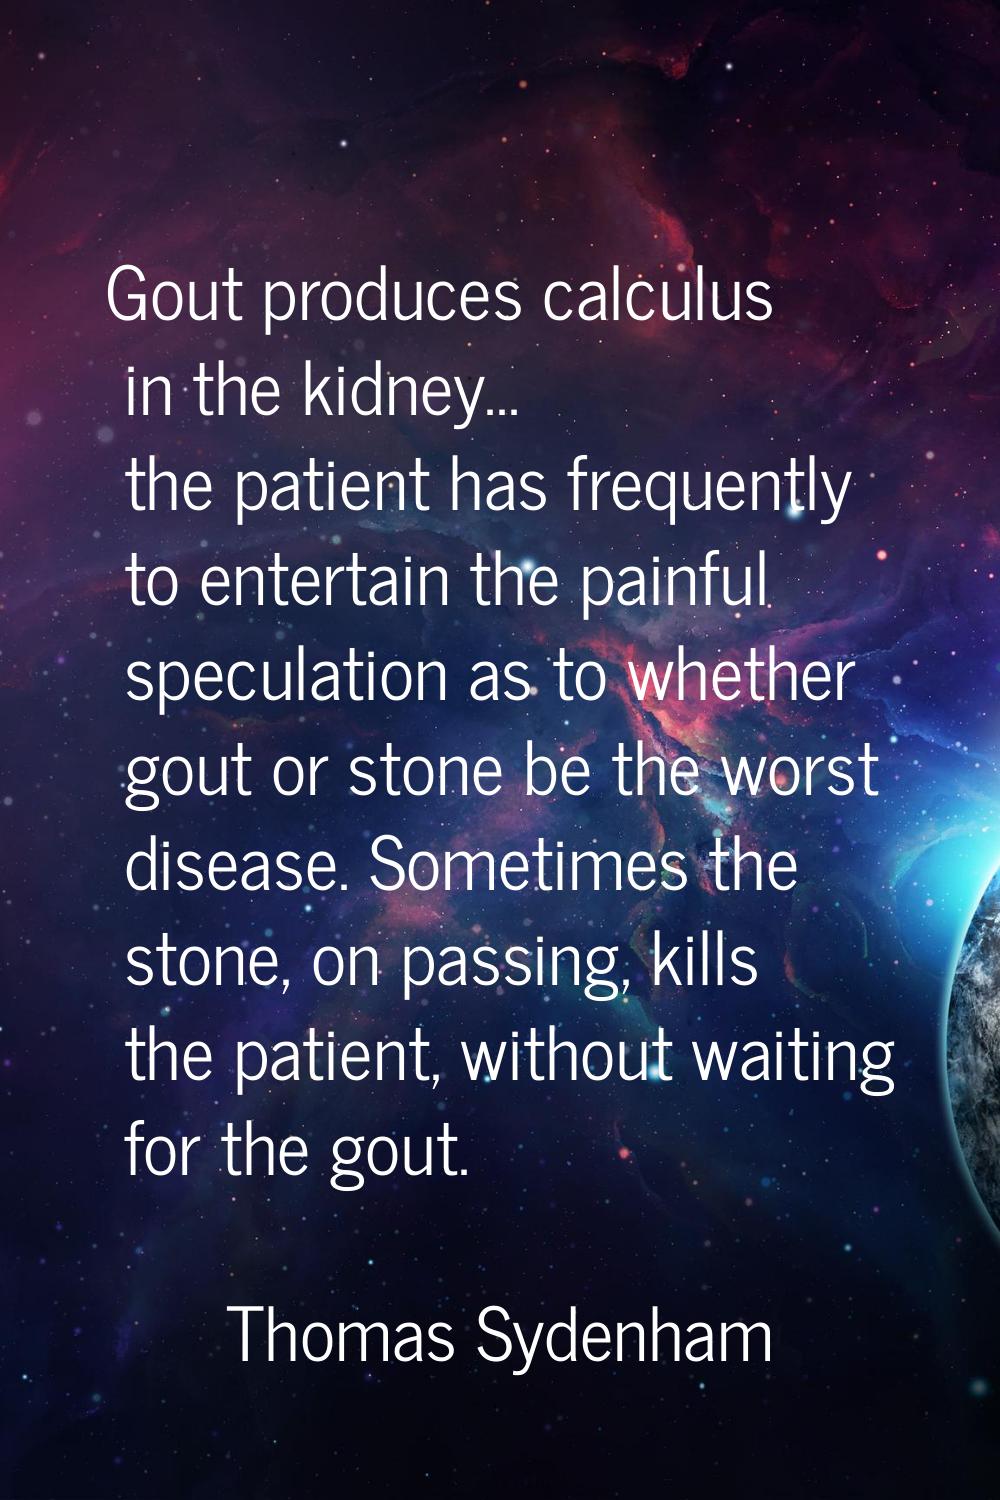 Gout produces calculus in the kidney... the patient has frequently to entertain the painful specula